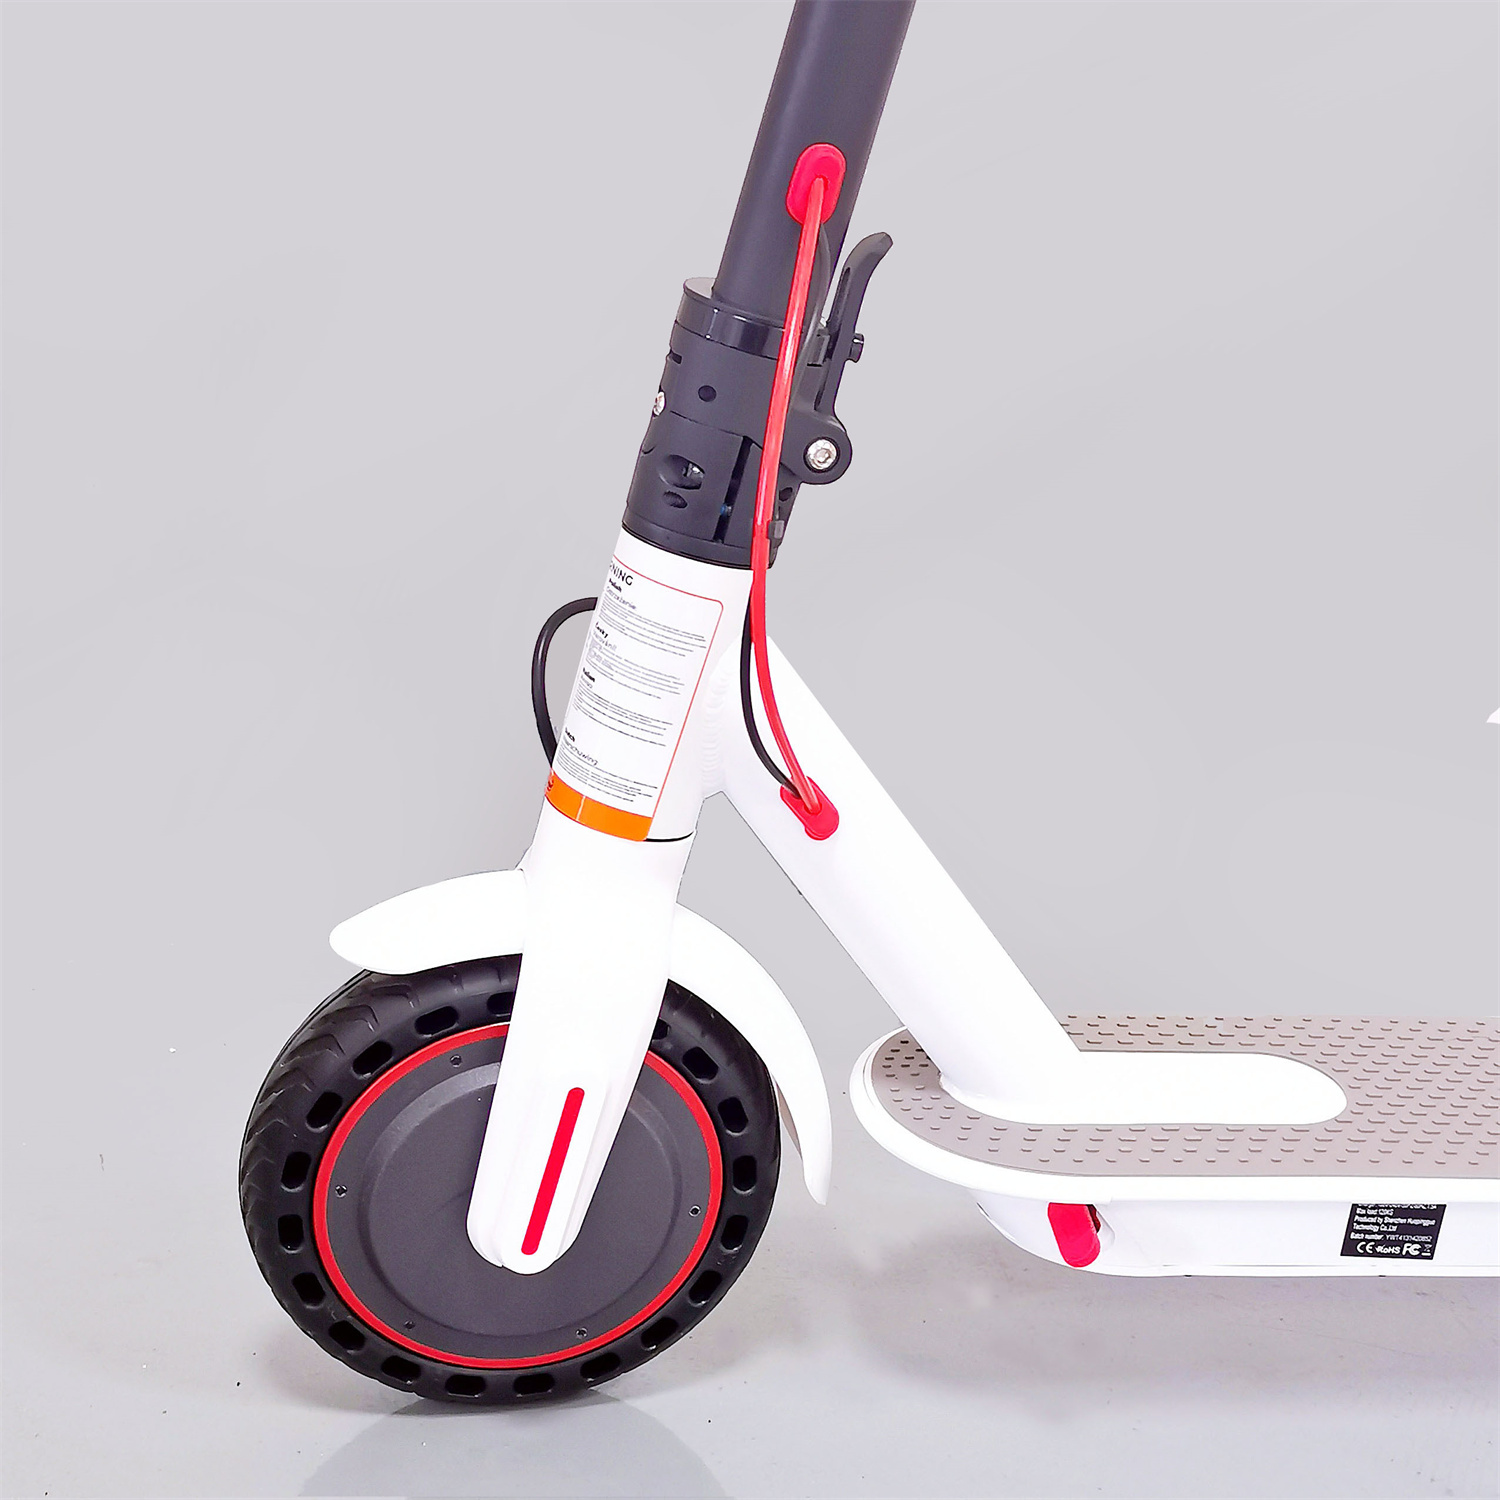 [EU DIRECT] Emoko T4 PRO Electric Scooter 350W Motor 36V 10.4Ah Battery 8.5inch Tires 39KM Max Mileage 120KG Max Load Folding E-Scooter